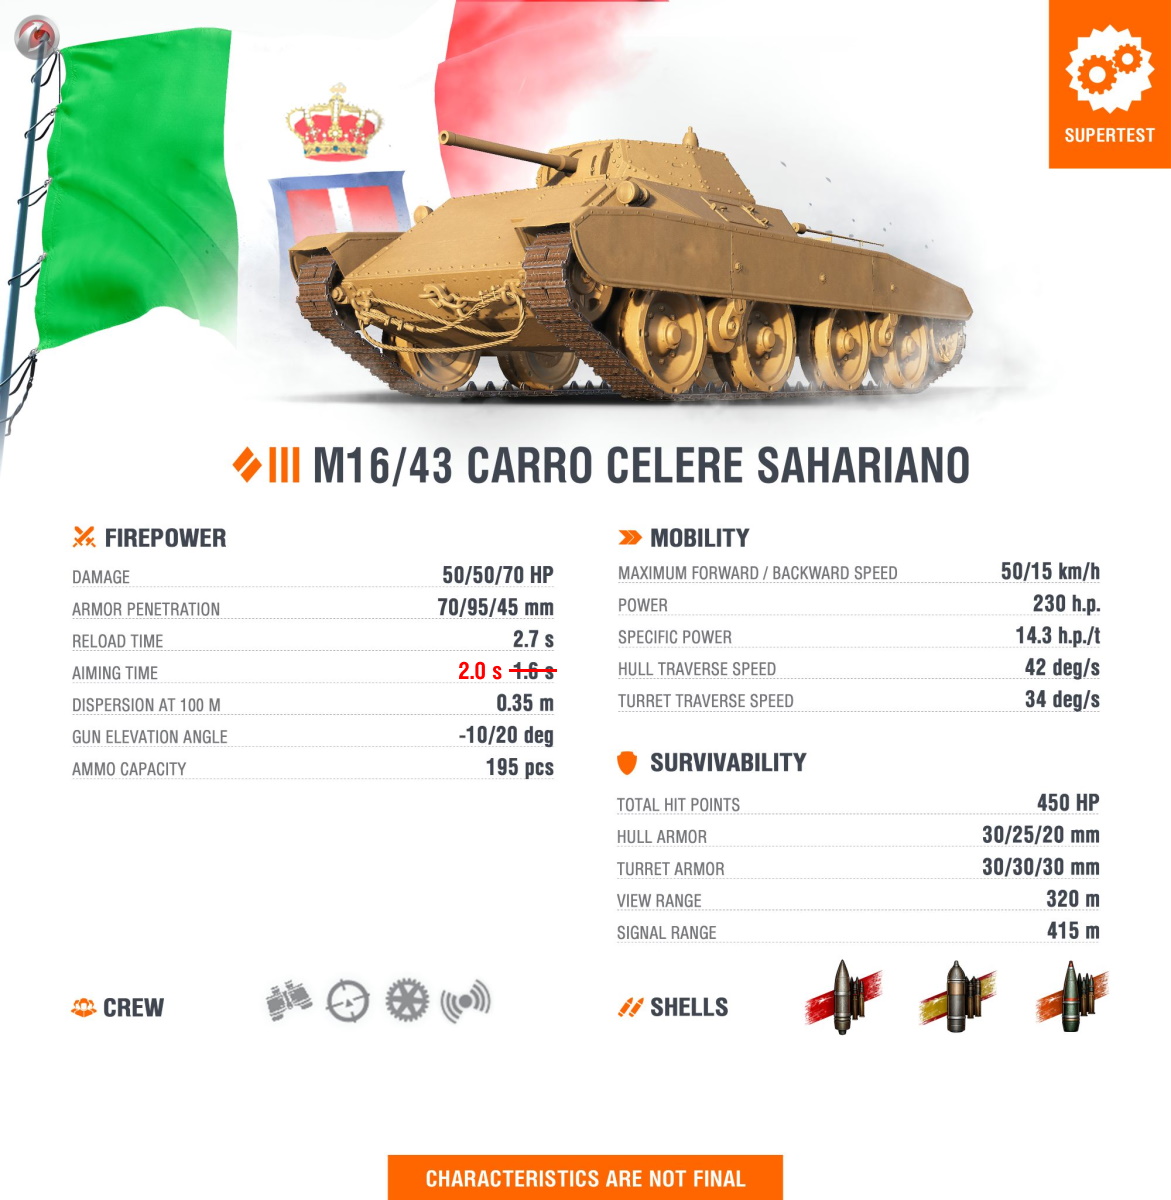 M16/43 Sahariano Statcard (with updated firepower stat as of 23 Sept 2022)